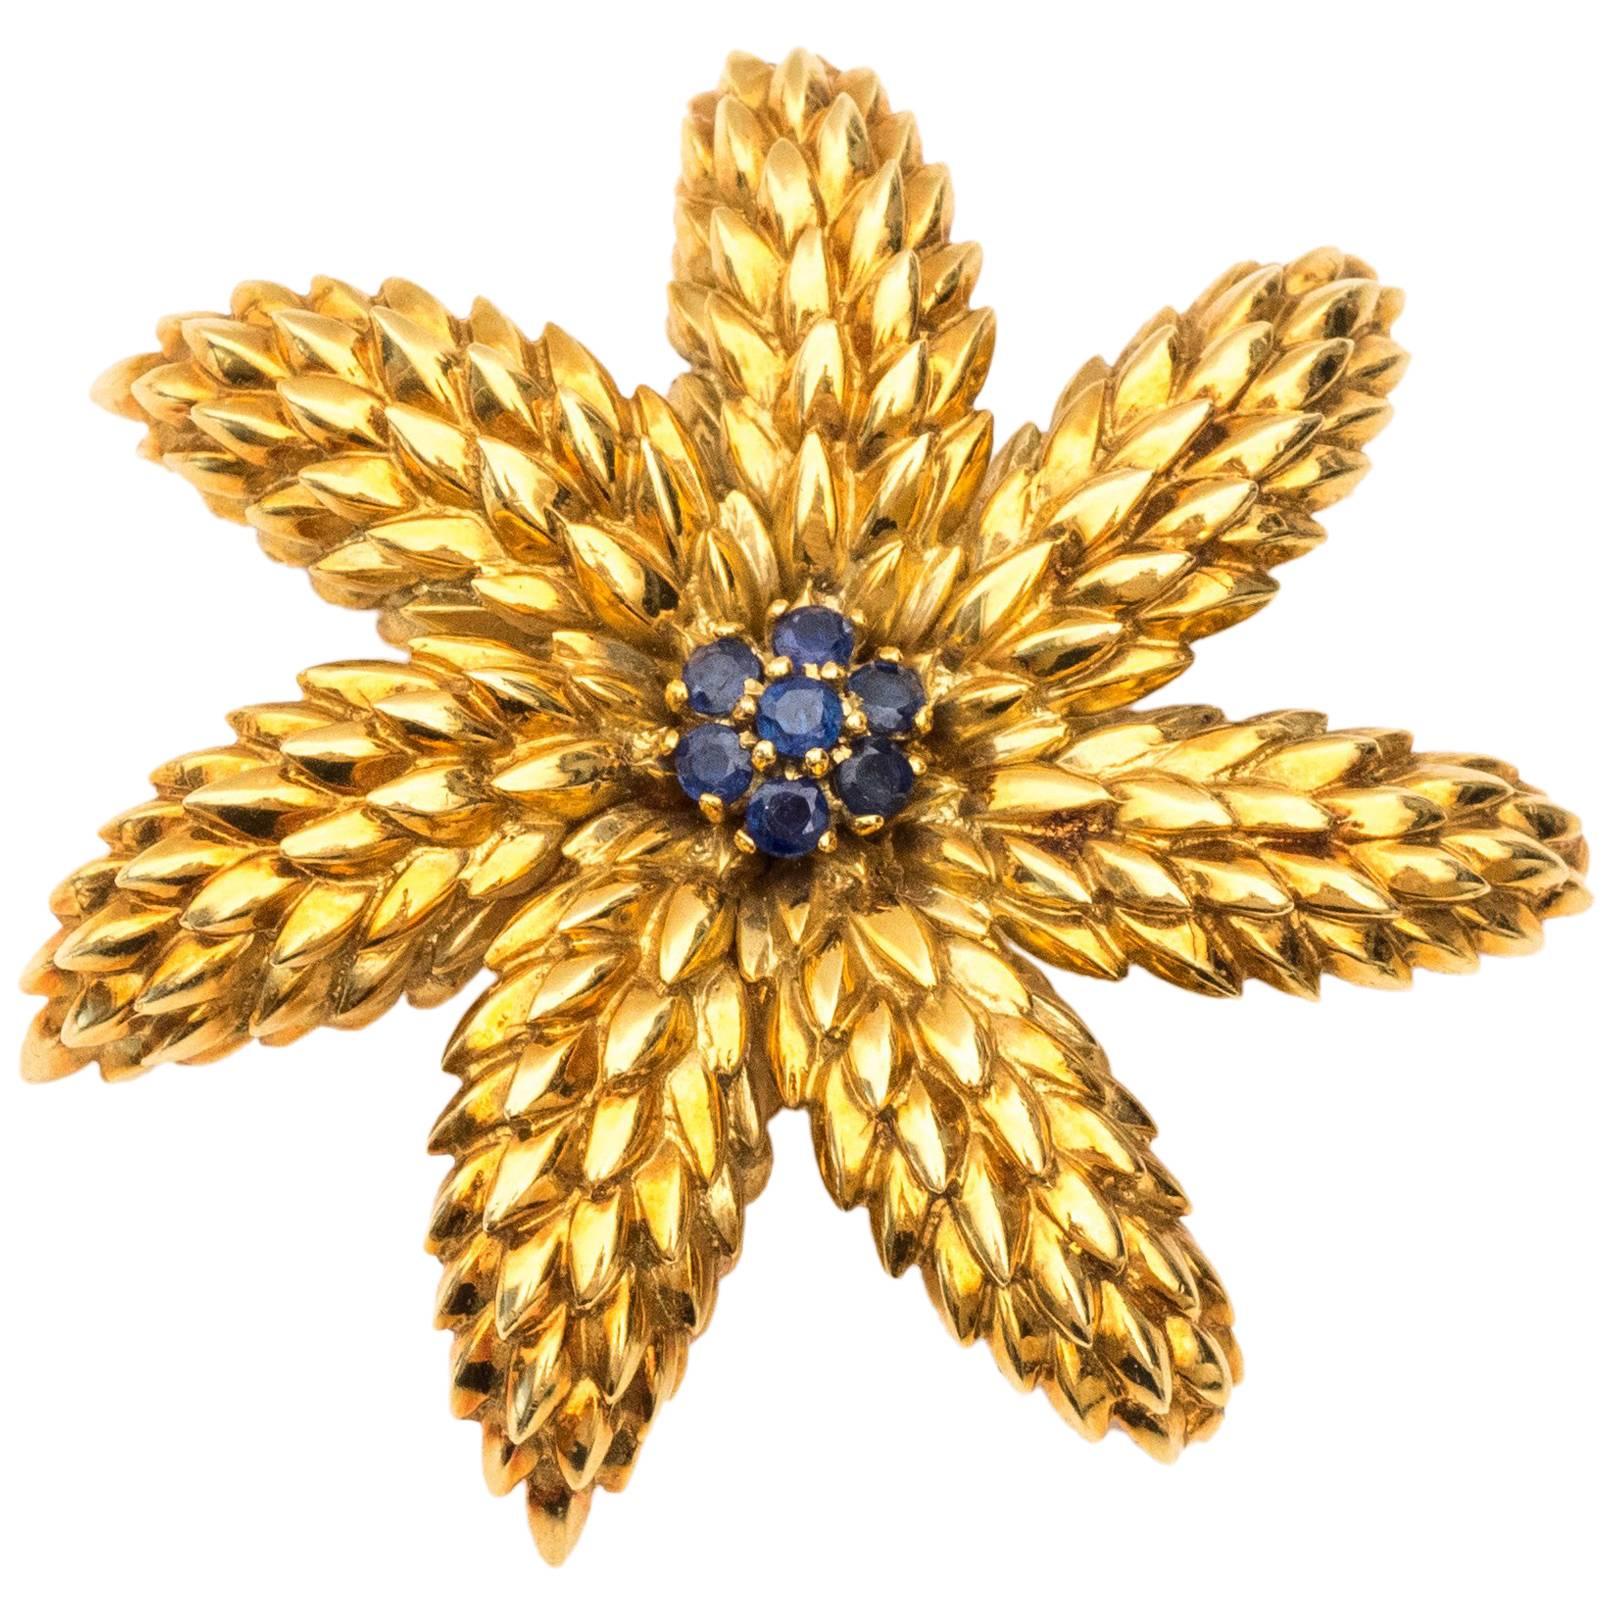 1950s Tiffany & Co. Schlumberger Brooch, 18K Yellow Gold, Sapphires